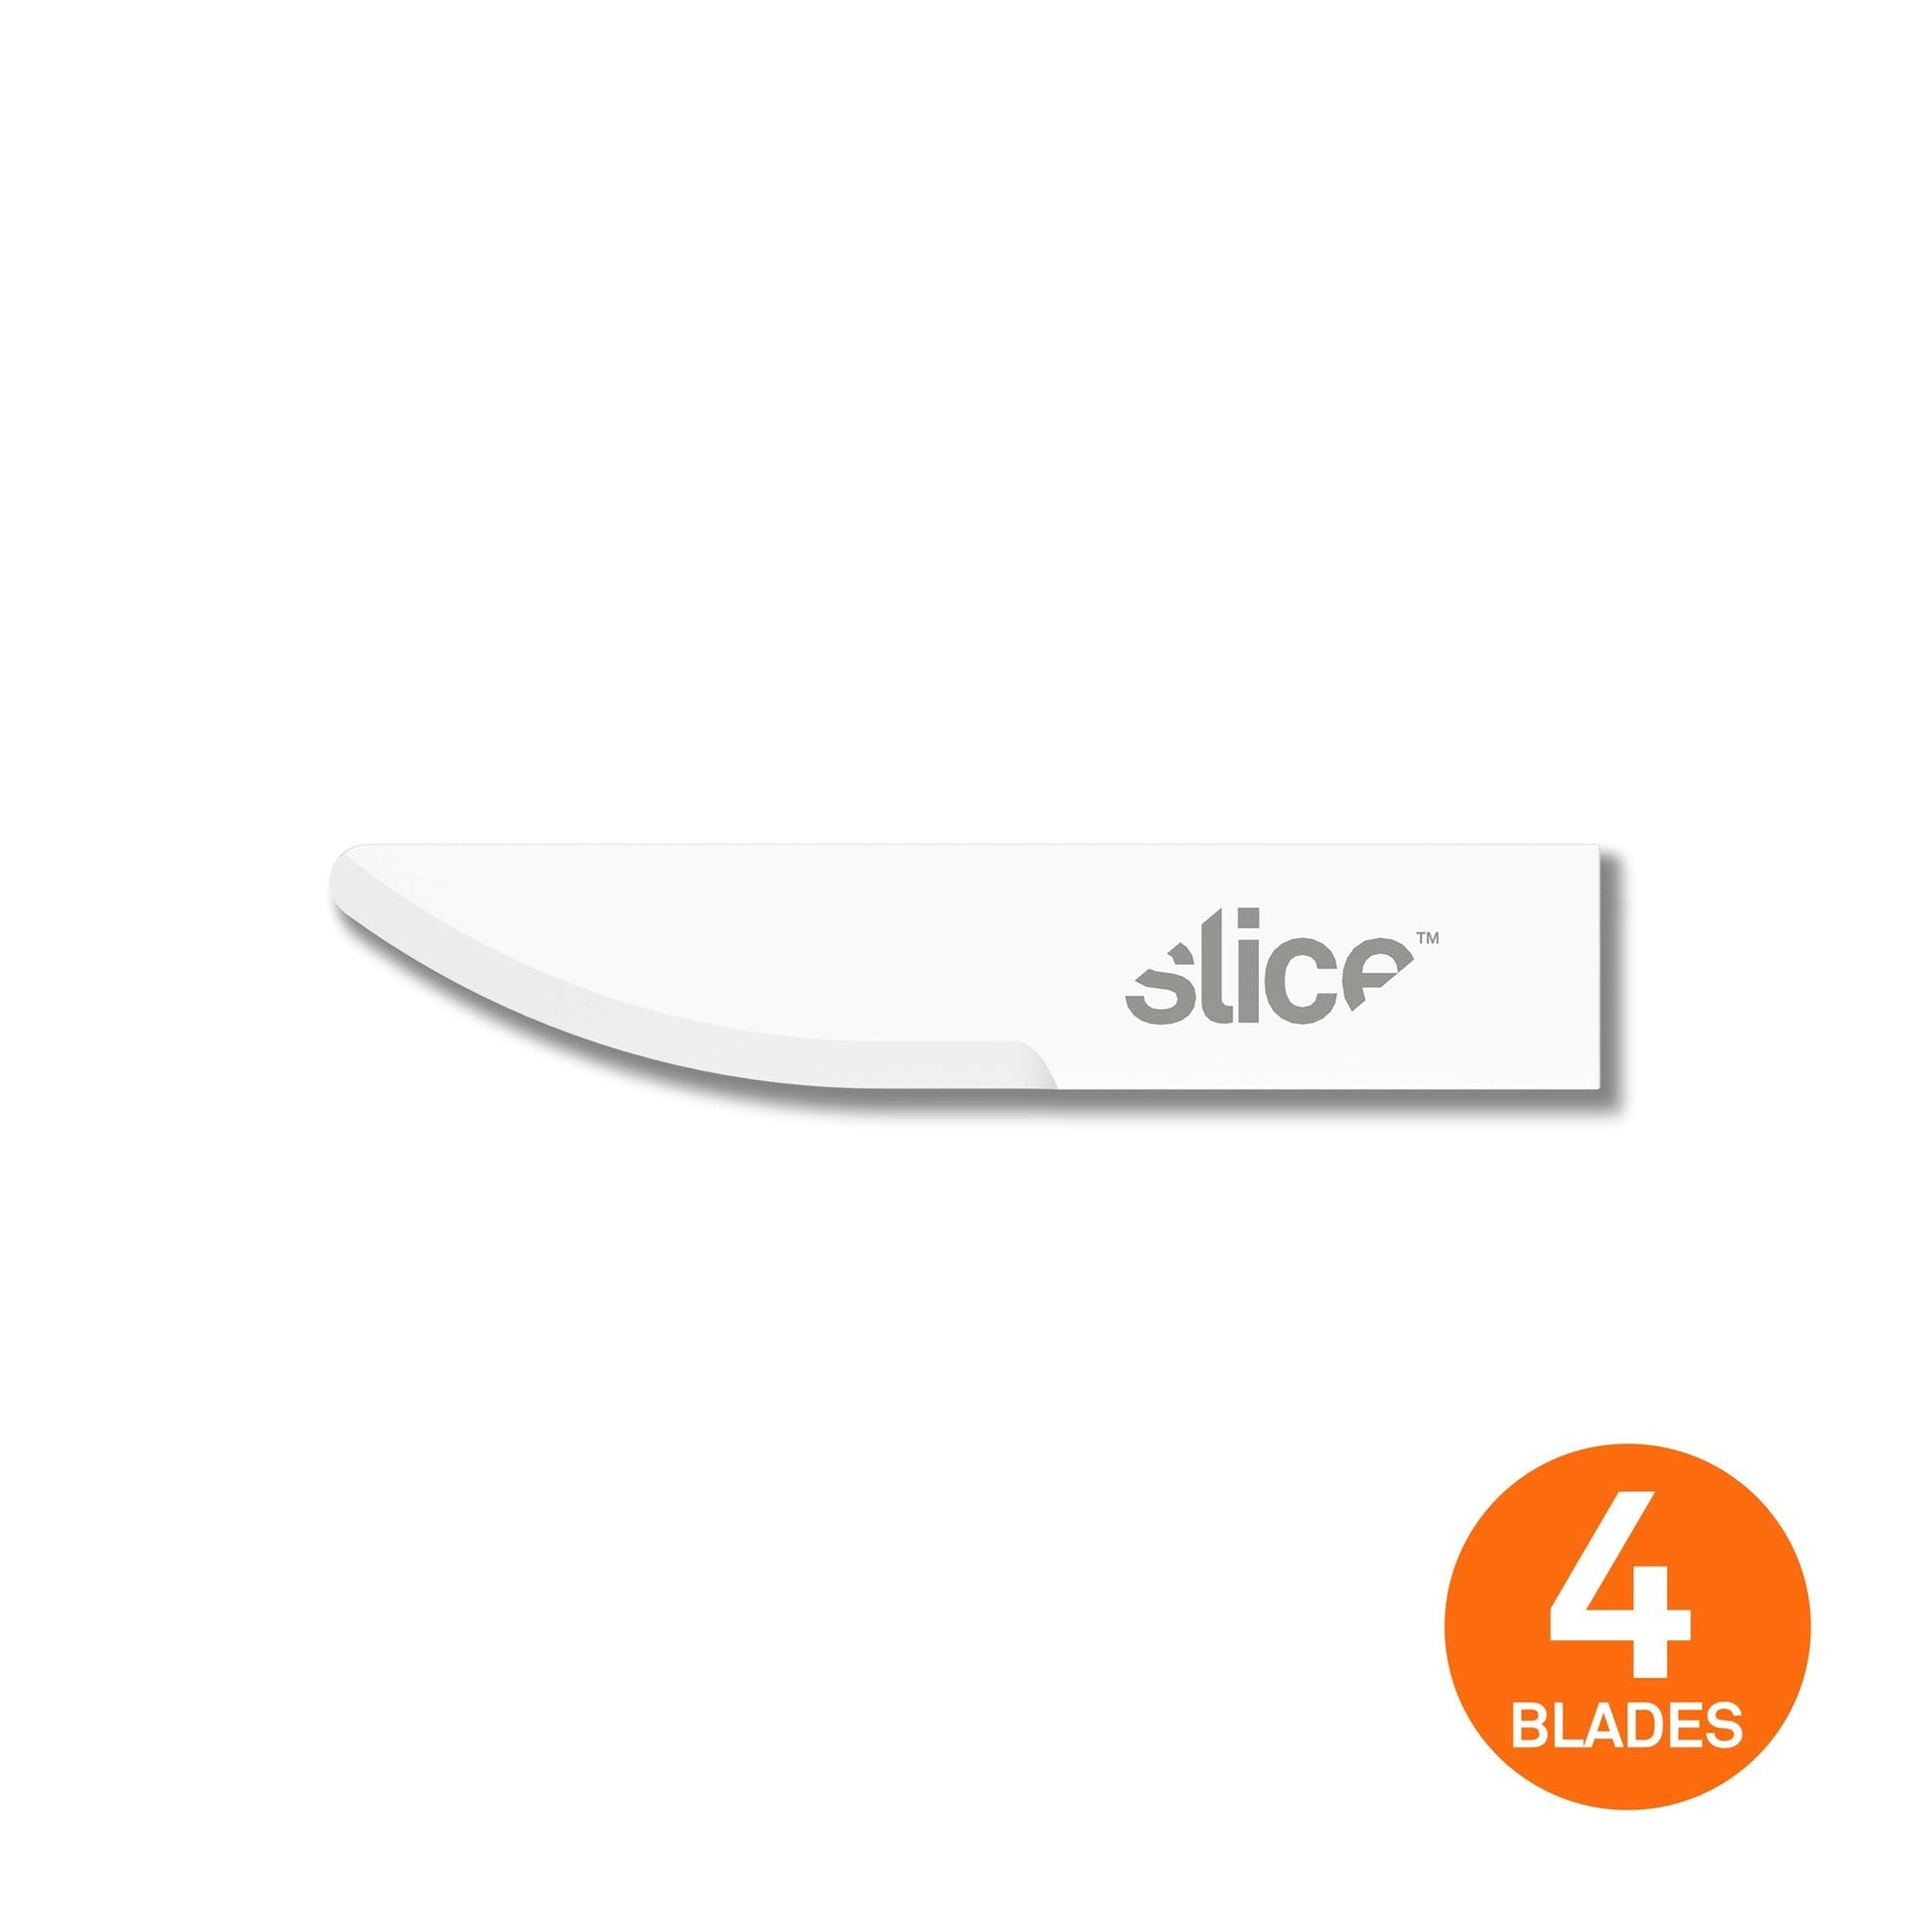 The Slice 10520 Ceramic Craft Knife Blade with a curved edge and rounded tip